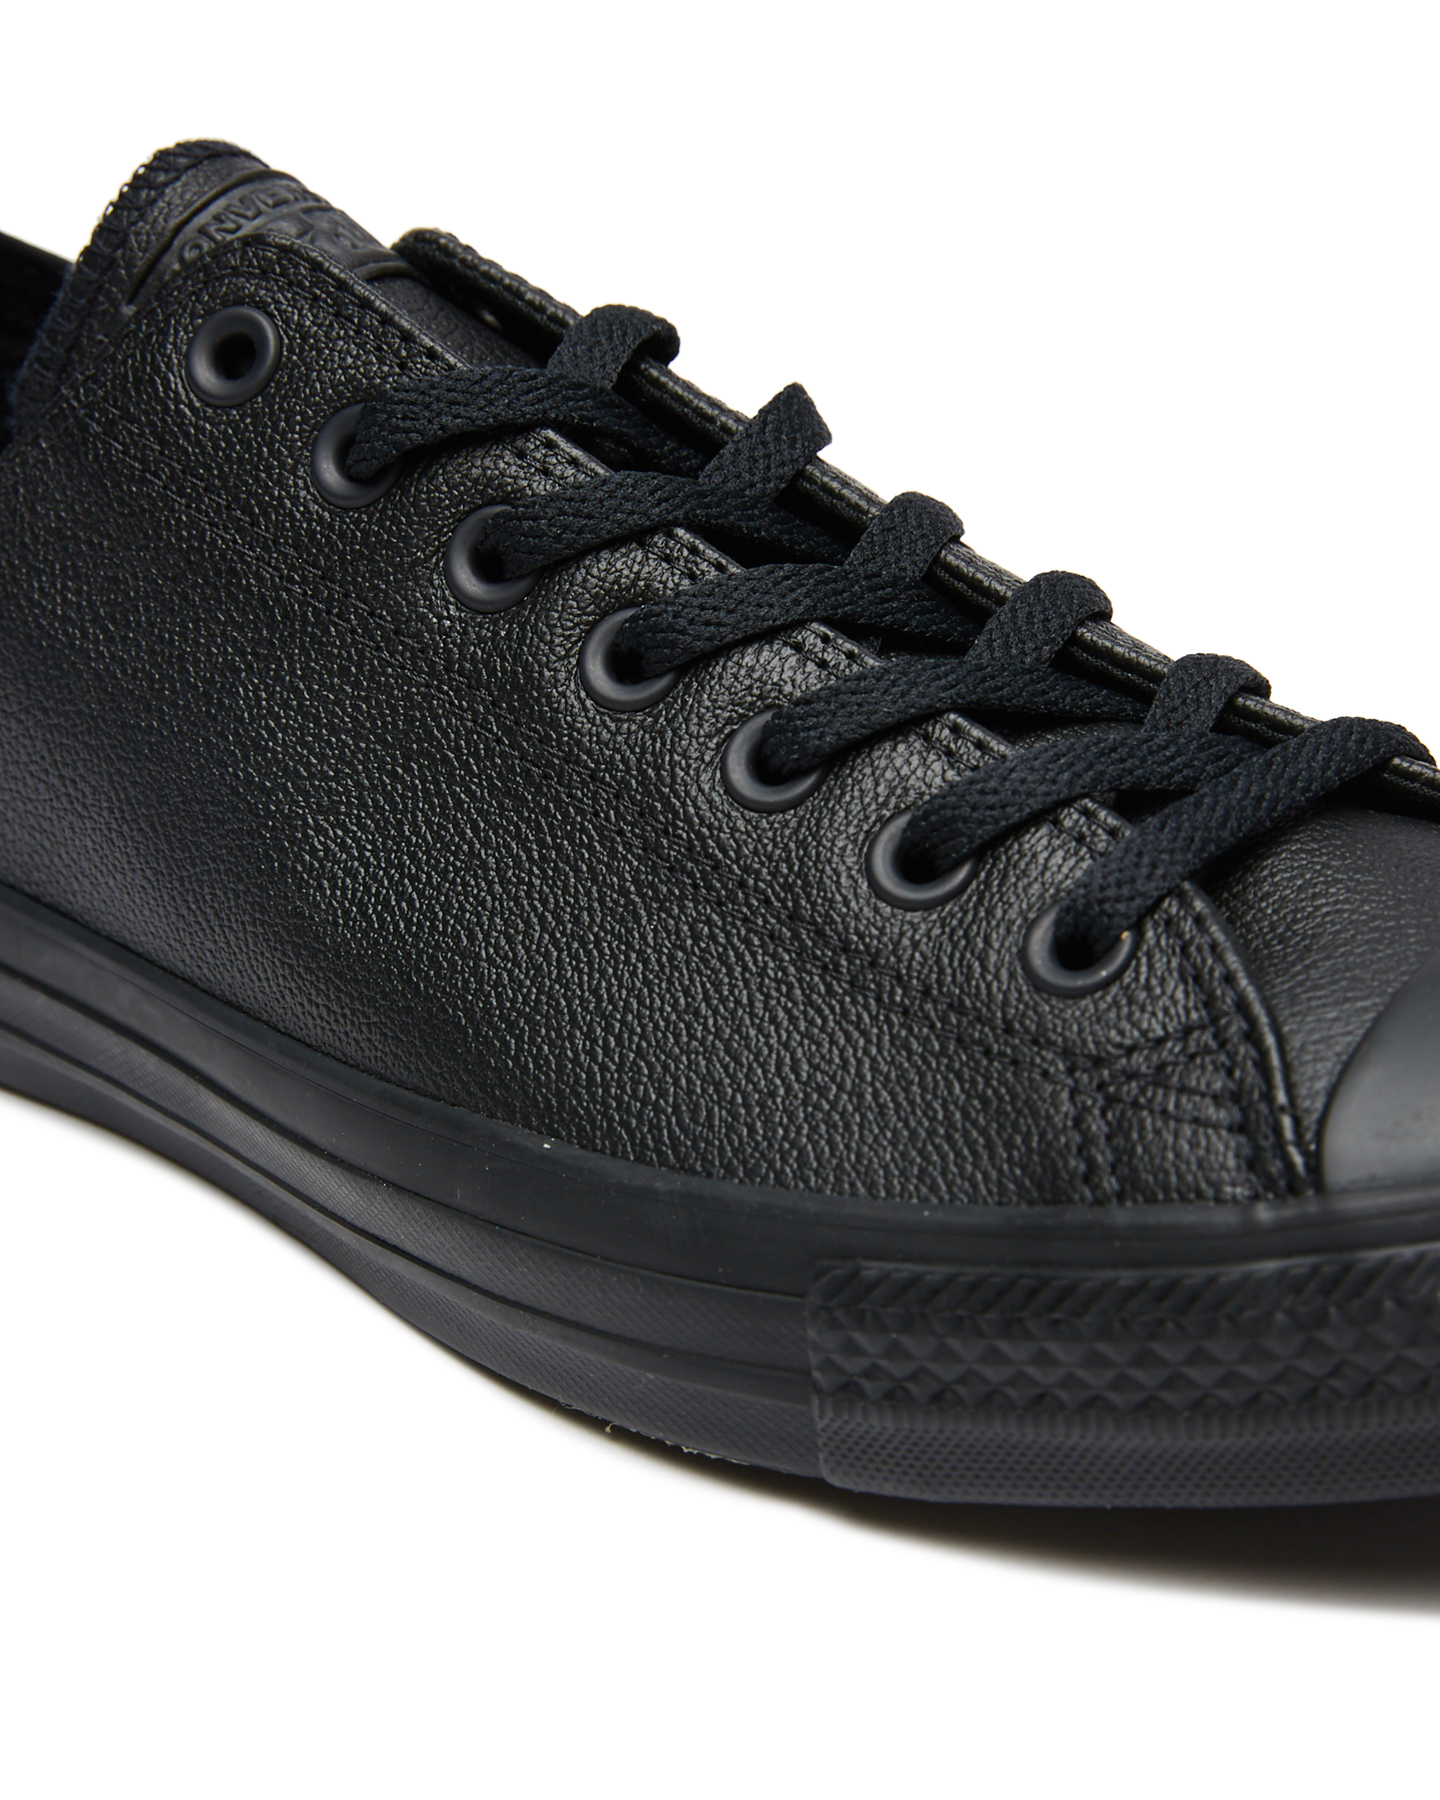 Converse Womens Chuck Taylor All Star Lo Leather Shoe - Black